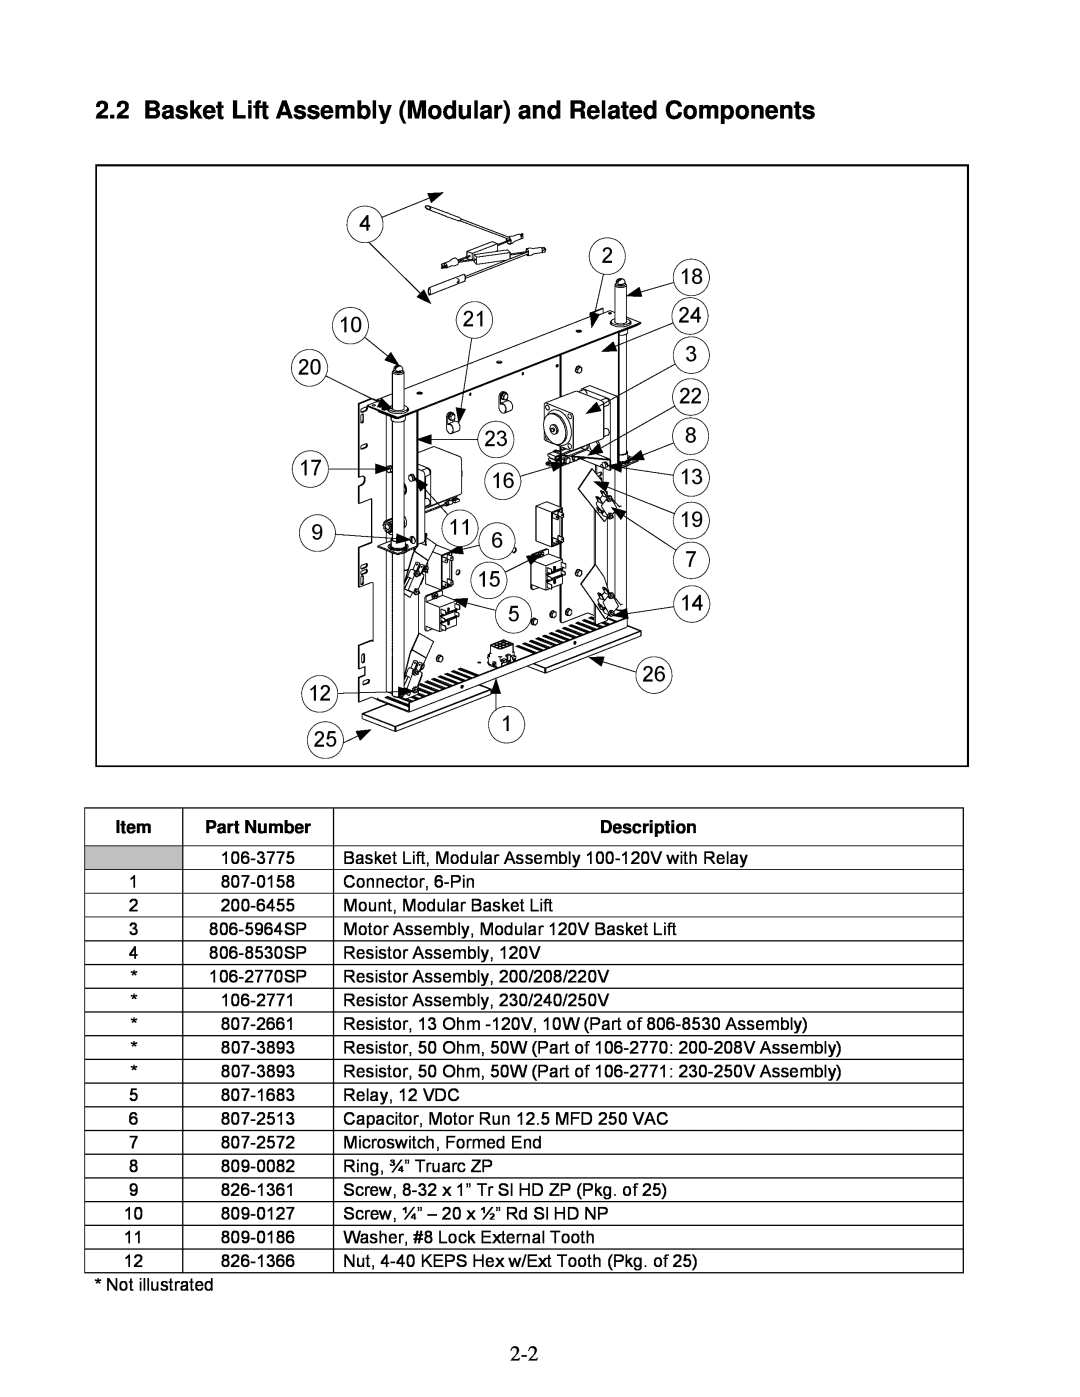 Frymaster 2836 manual Basket Lift Assembly Modular and Related Components, Part Number, Description 